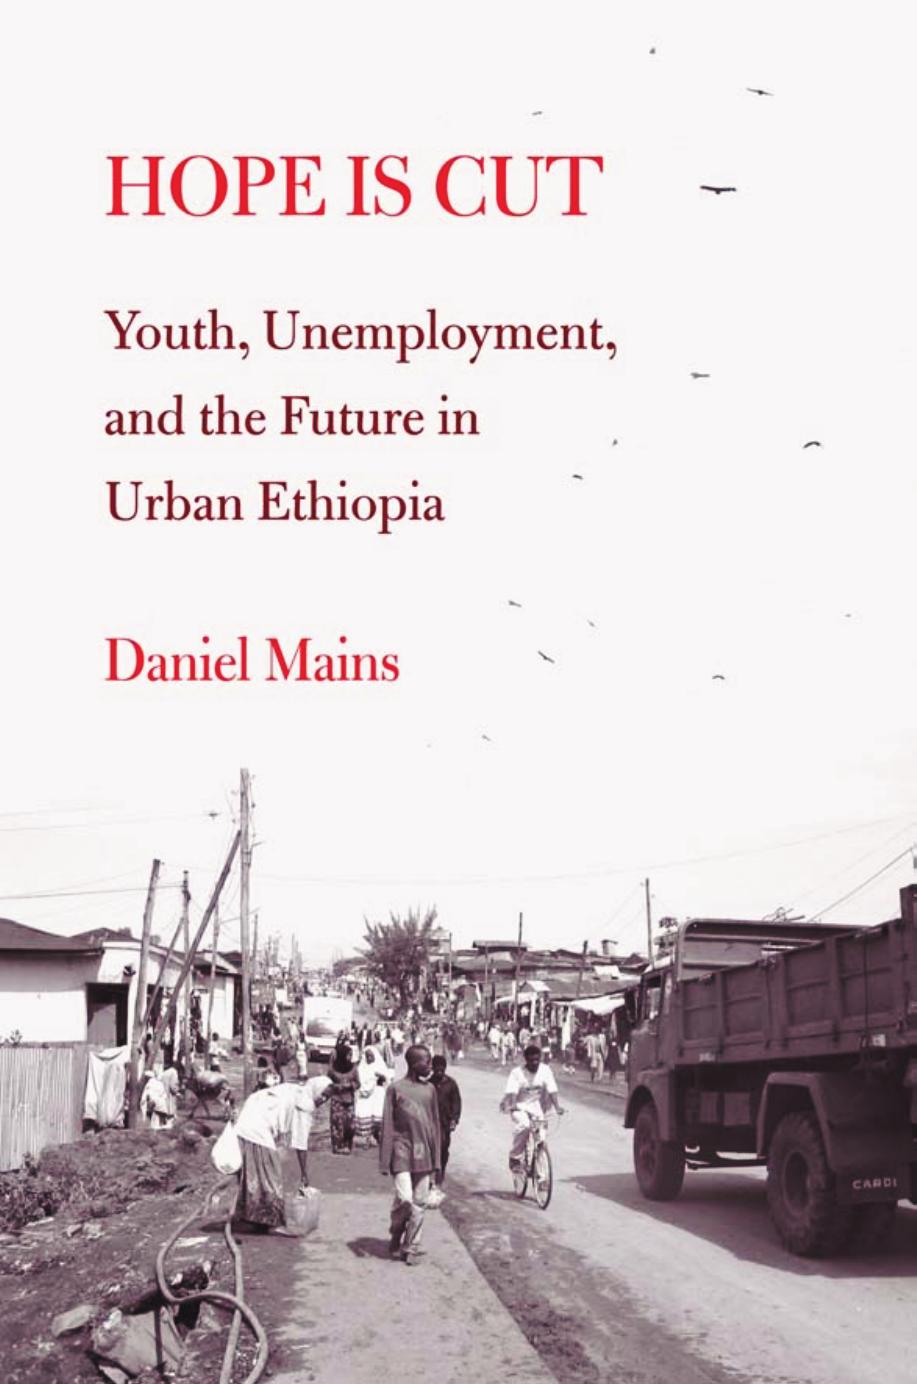 Hope Is Cut: Youth, Unemployment, and the Future in Urban Ethiopia by Daniel Mains